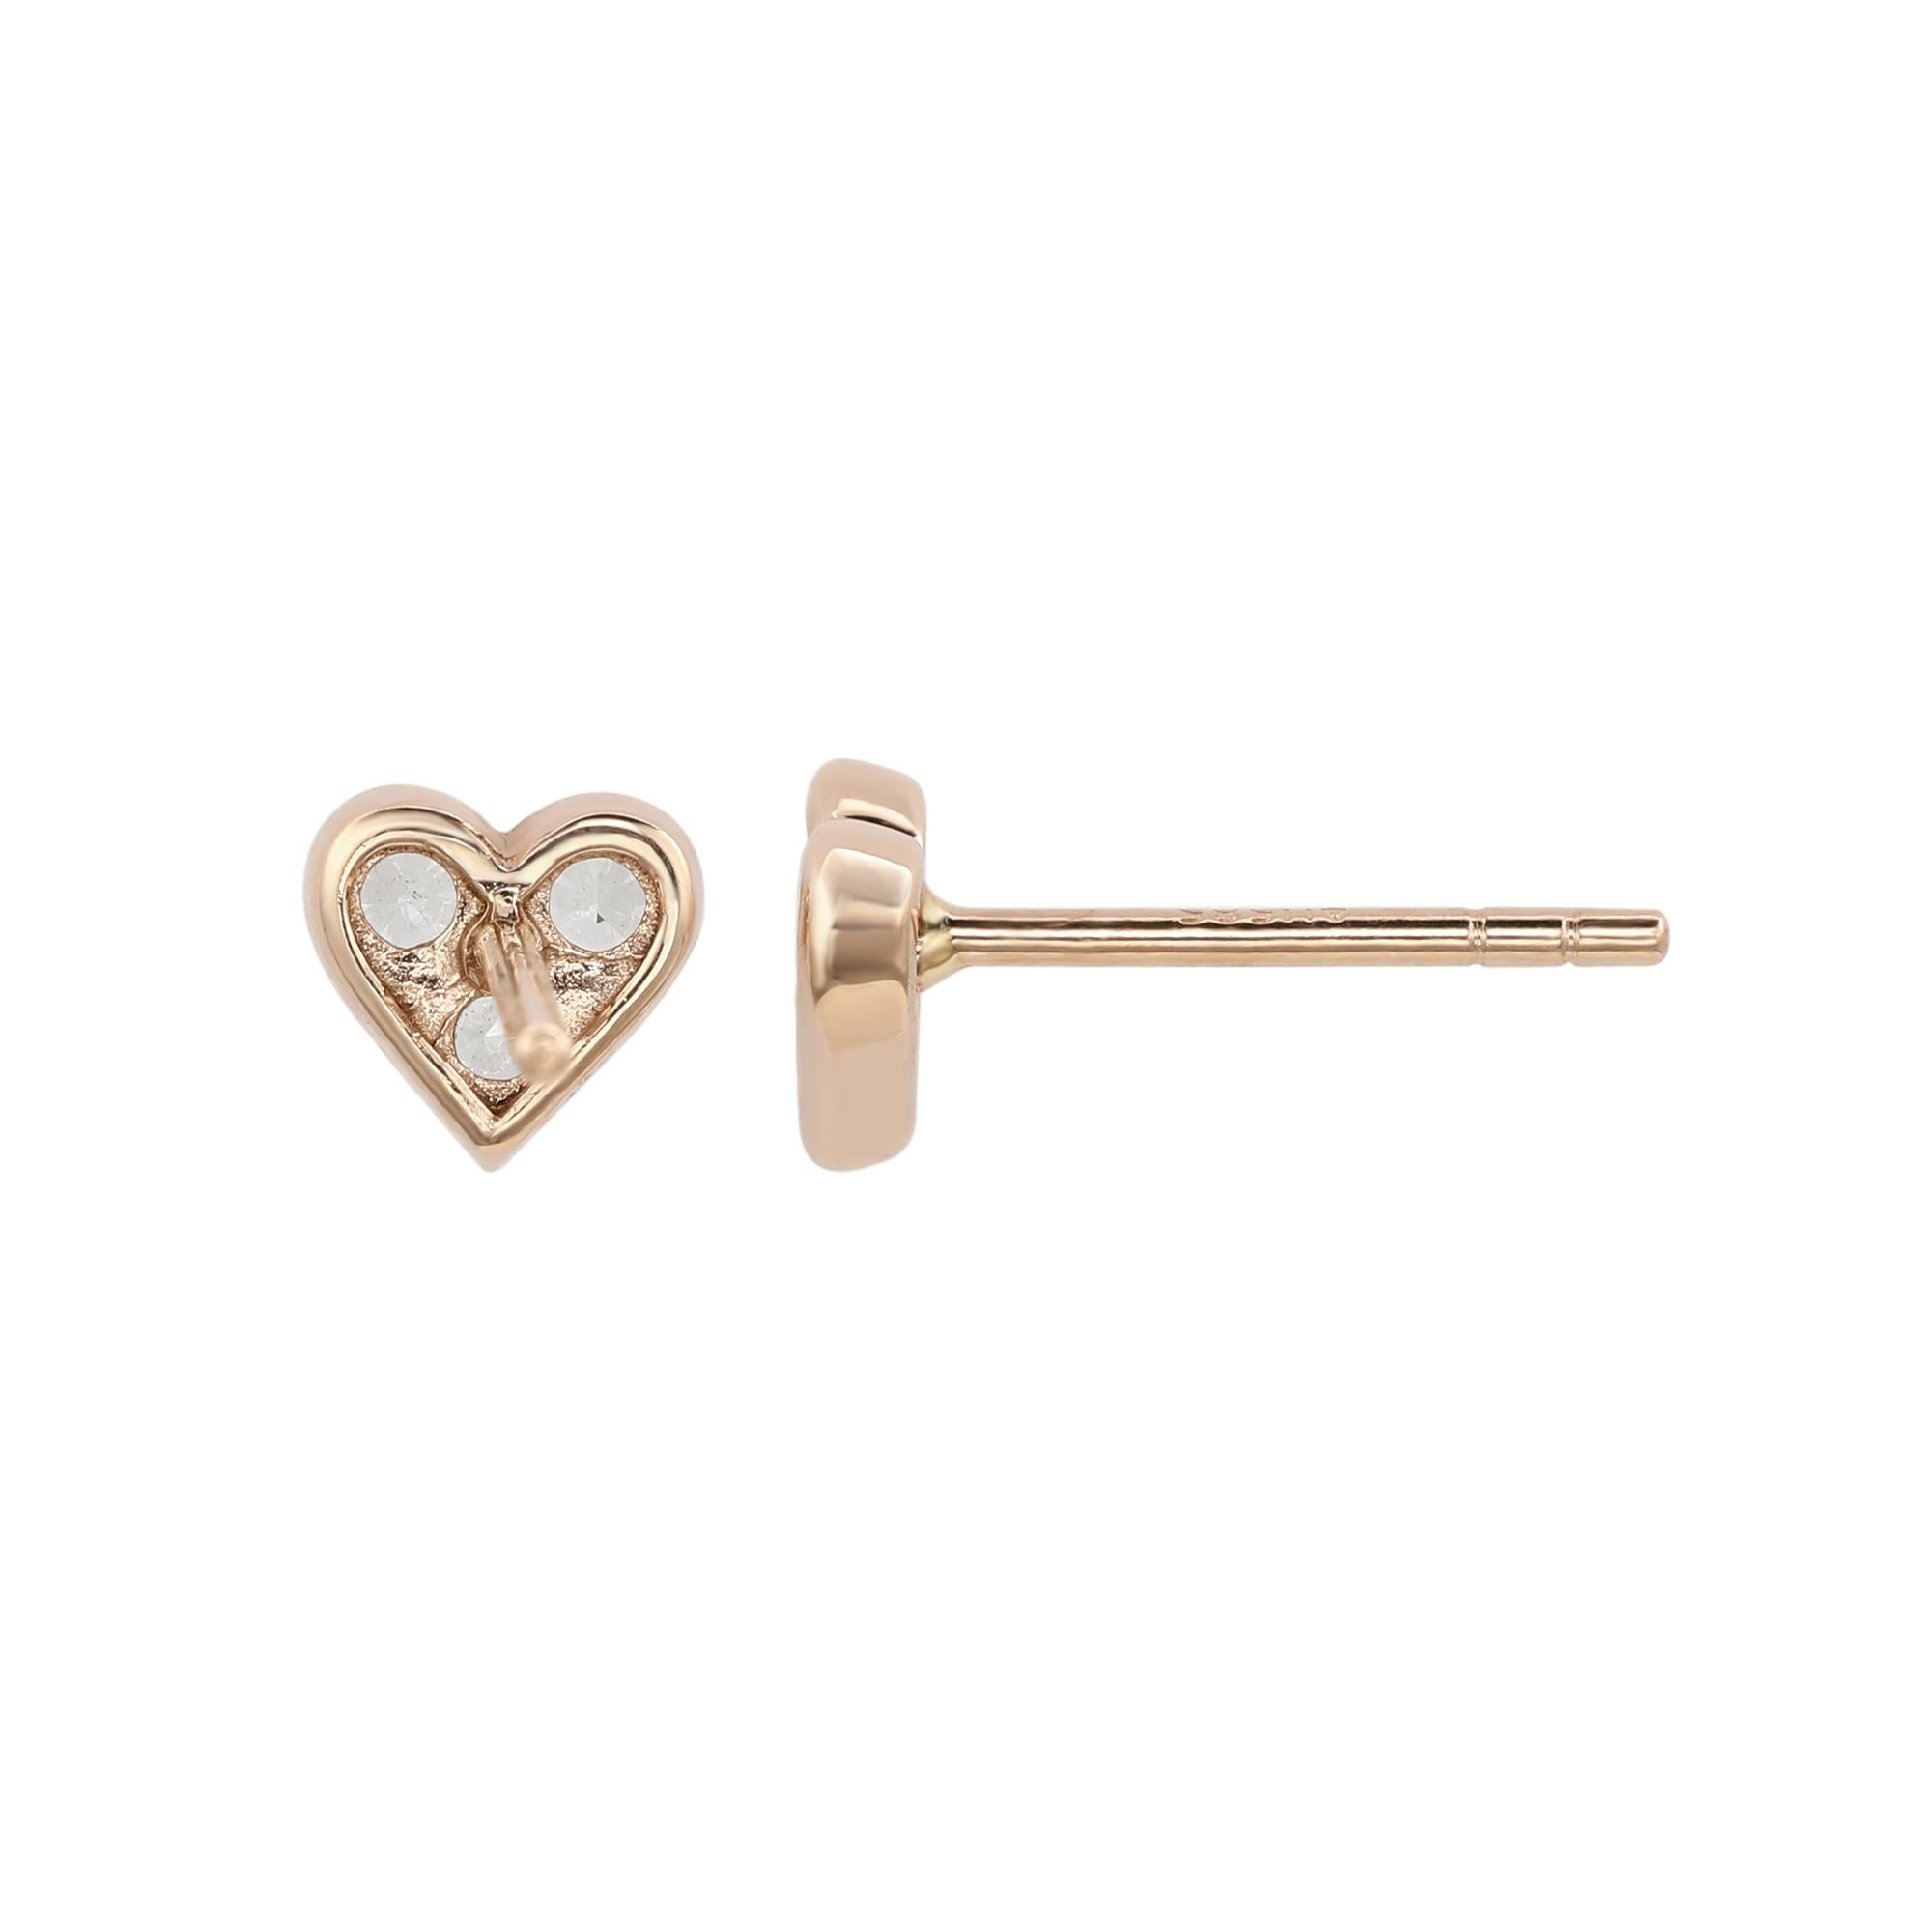 Add an elegant accent to your outfit with these sparkling Suzy Levian heart shape stud earrings featuring six round cut gorgeous white diamonds in a prong setting. The sparkling diamonds are hand set in 14-karat rose gold, and weigh 0.30 cttw and